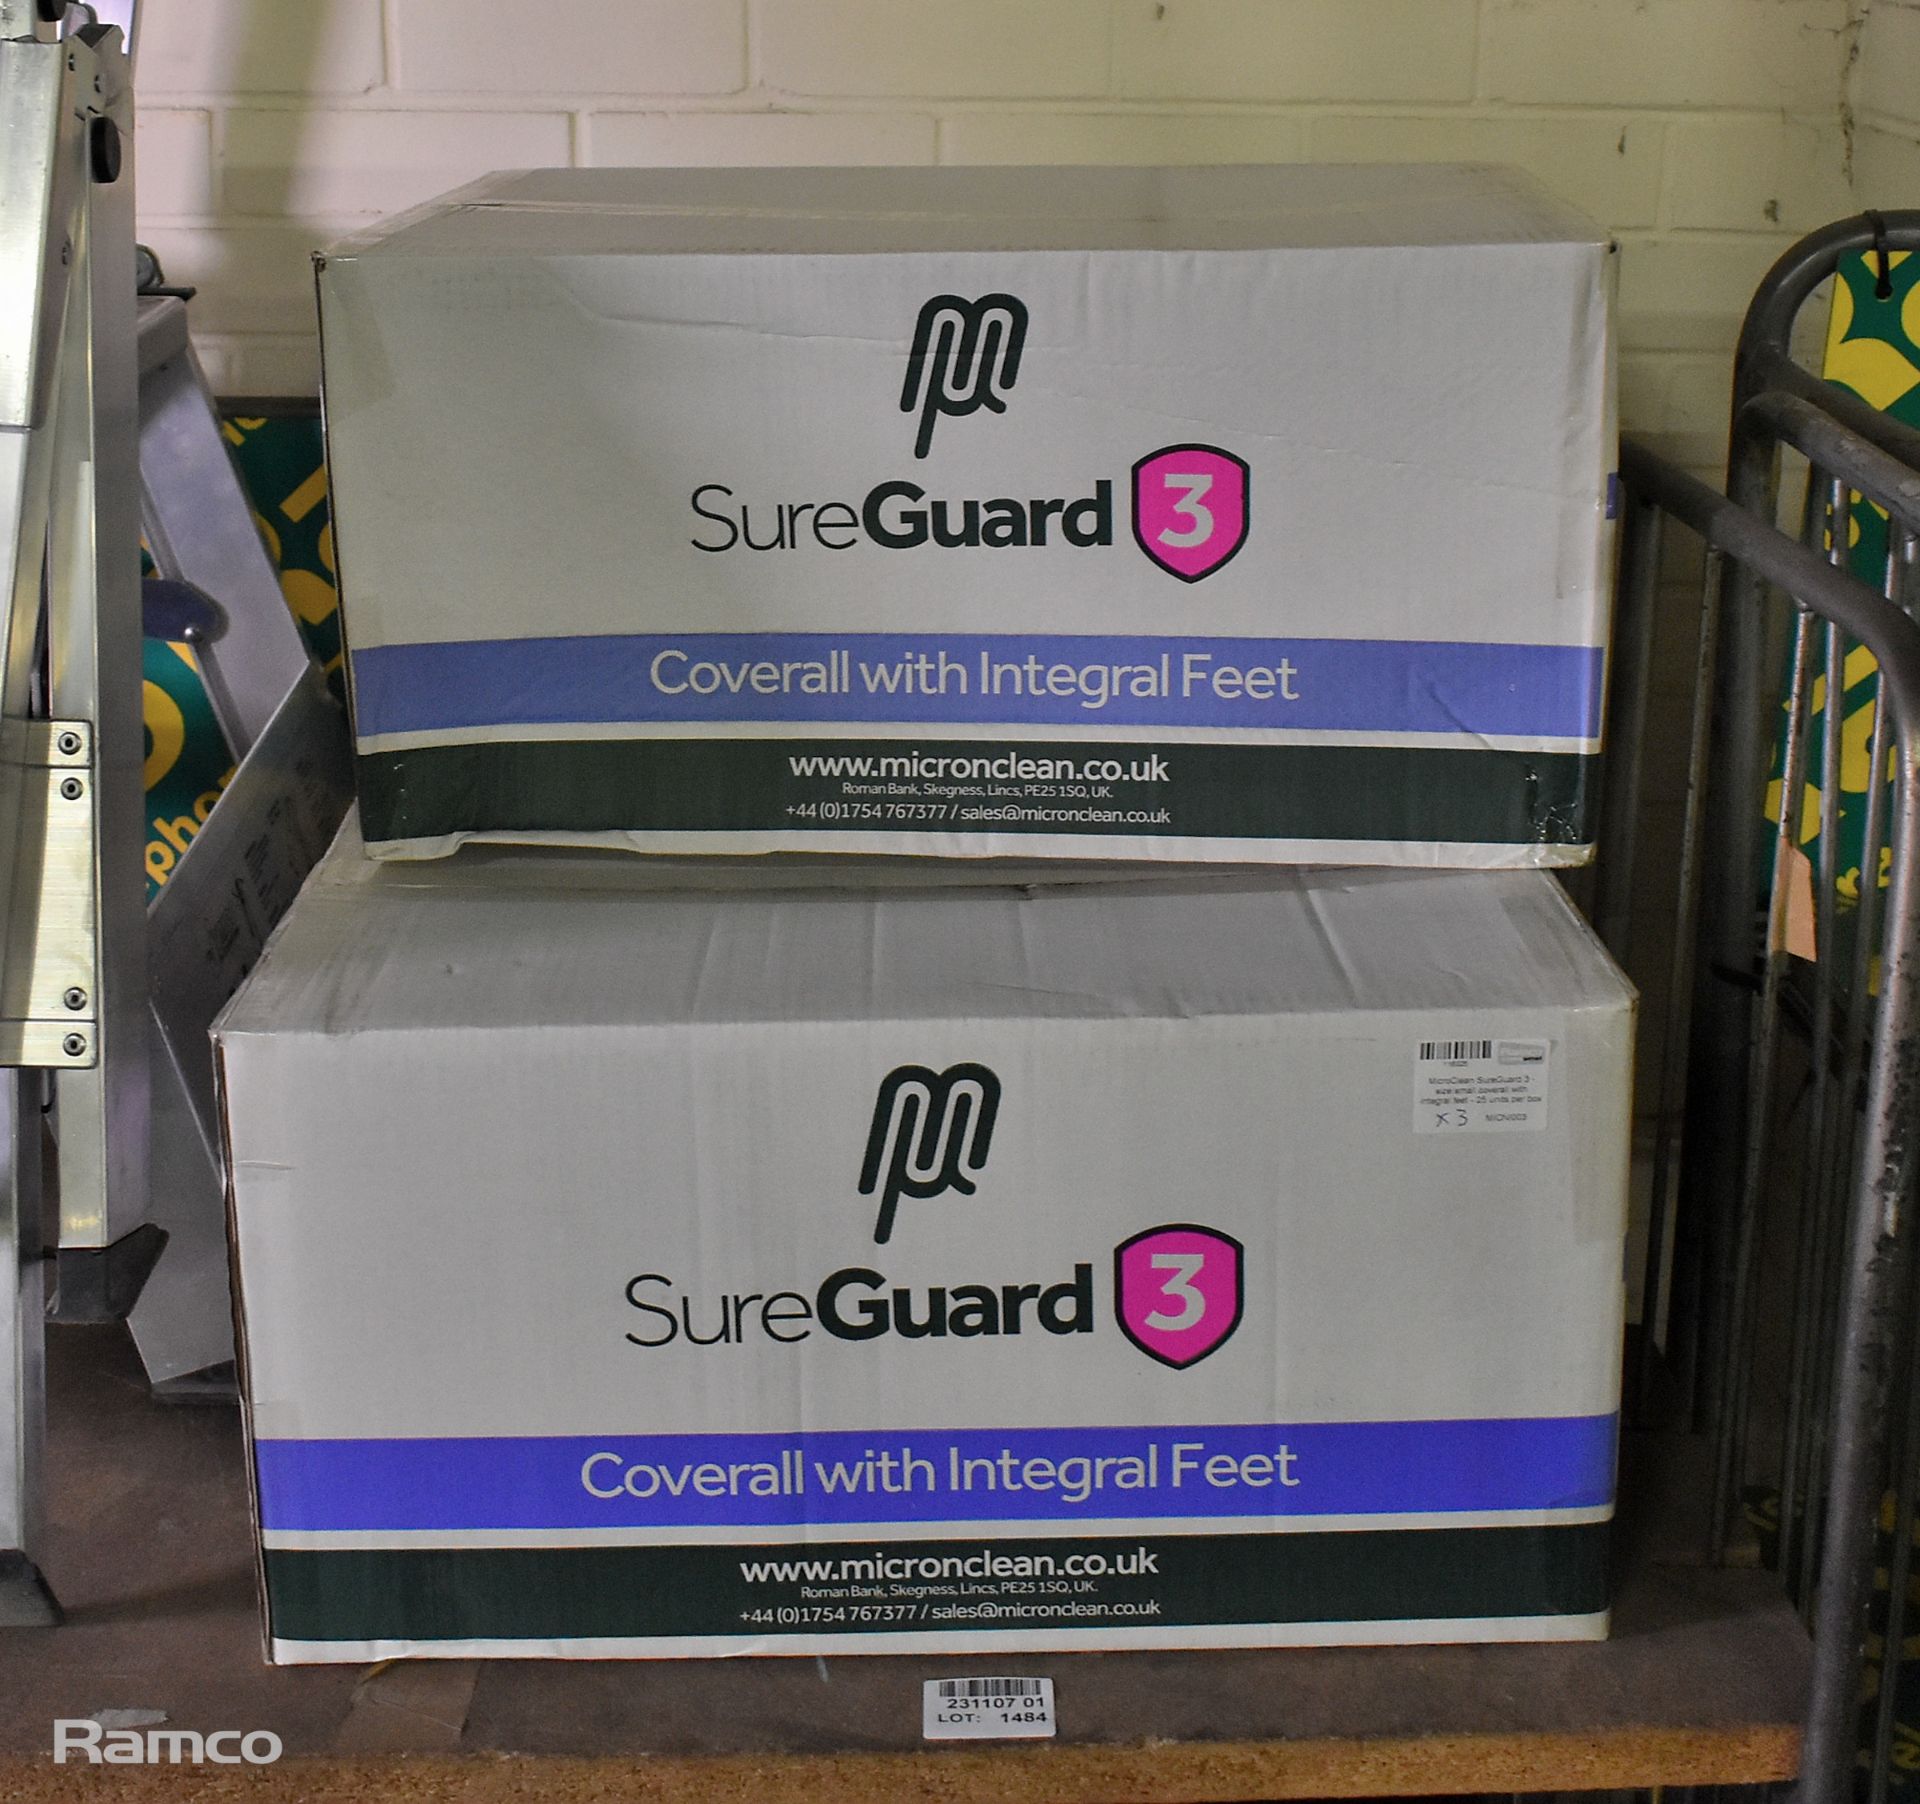 3x boxes of MicroClean SureGuard 3 coveralls with integral feet - size small - 25 units per box